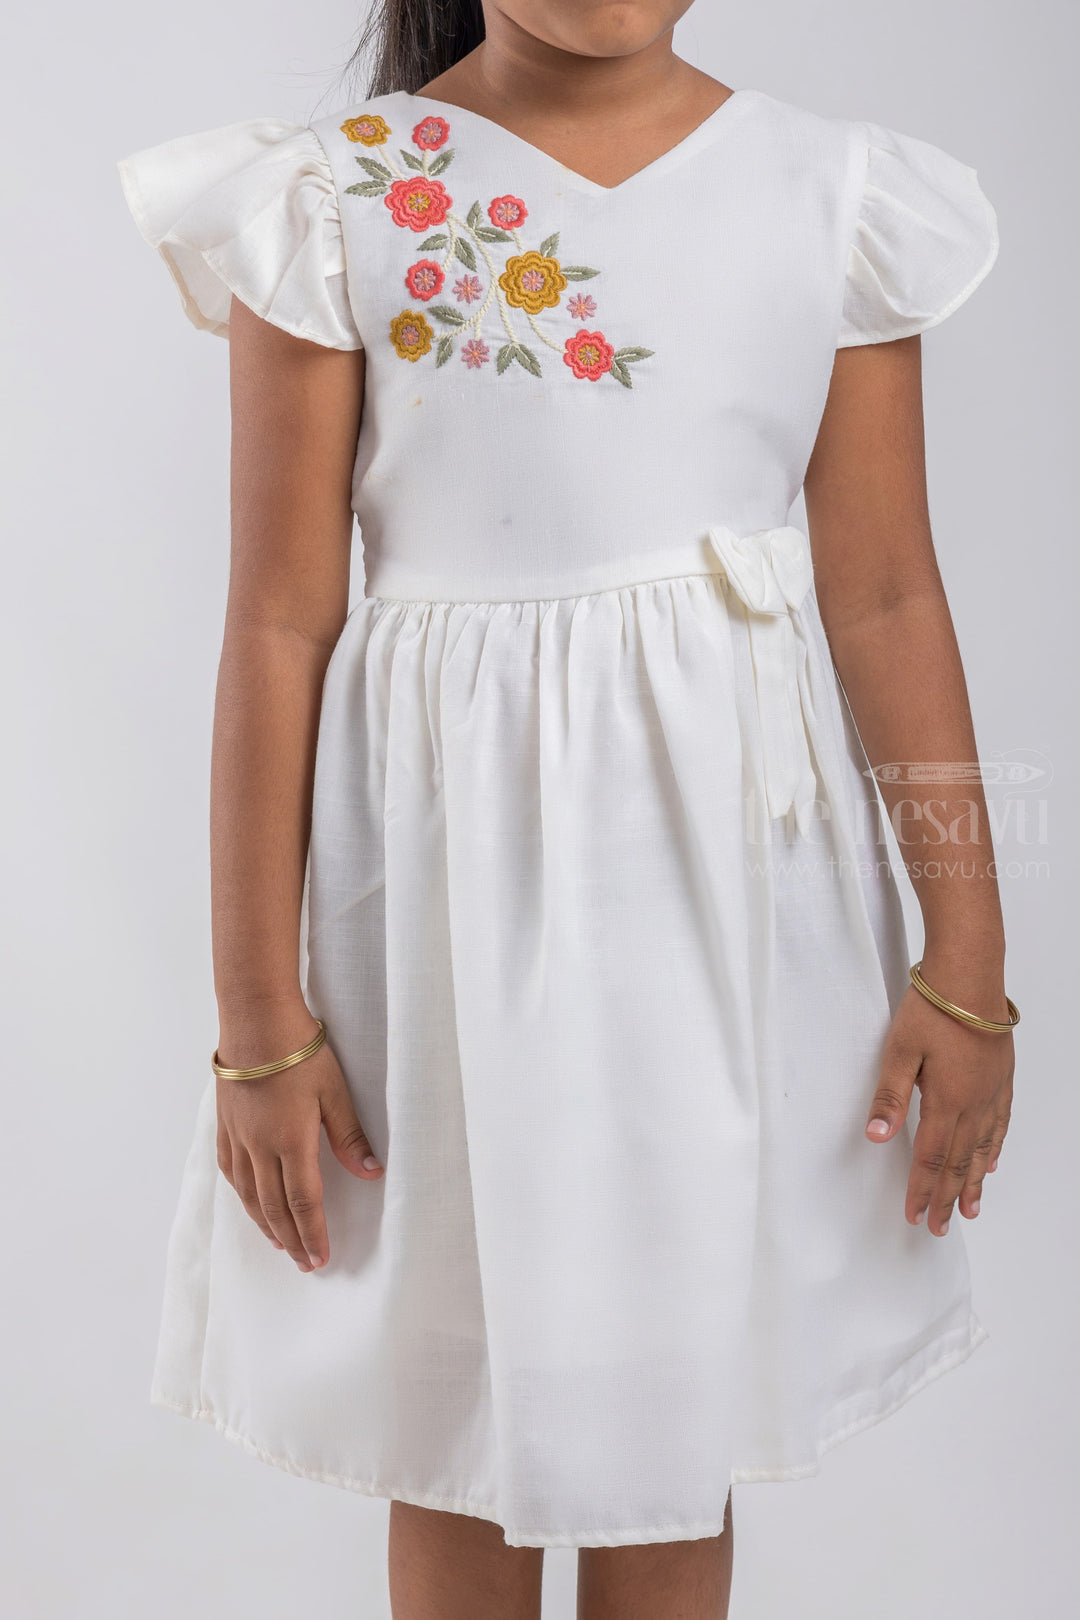 The Nesavu Girls Cotton Frock Pretty Floral Printed White Cotton Frock With Flared Sleeves psr silks Nesavu